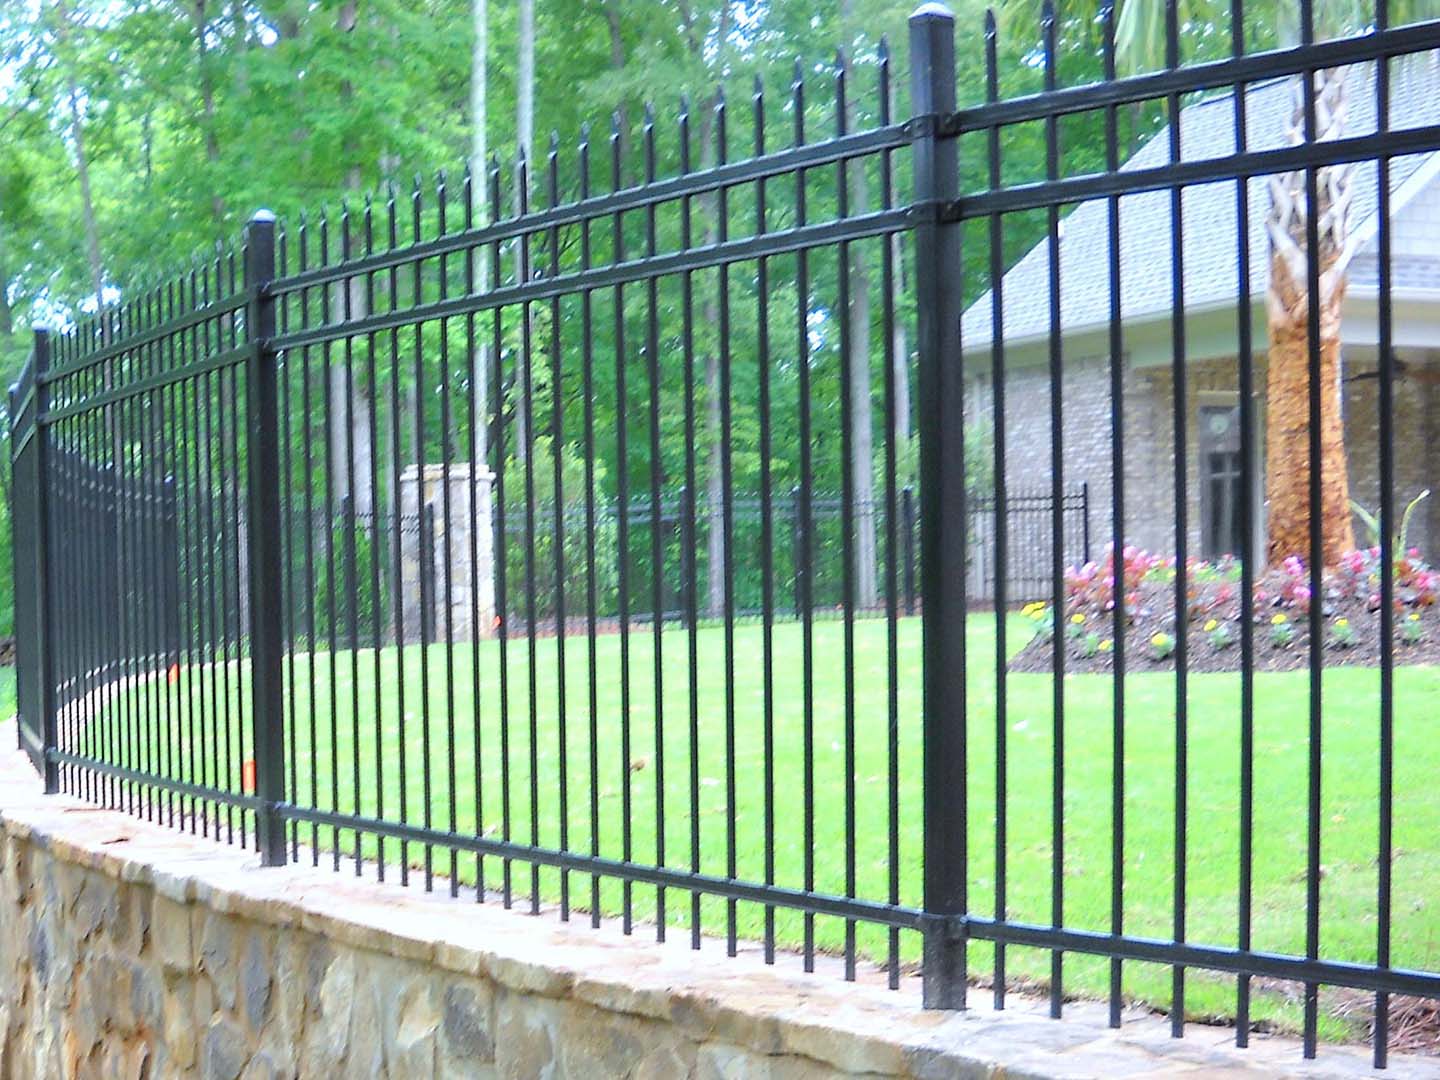 Johns Creek Georgia residential and commercial fencing